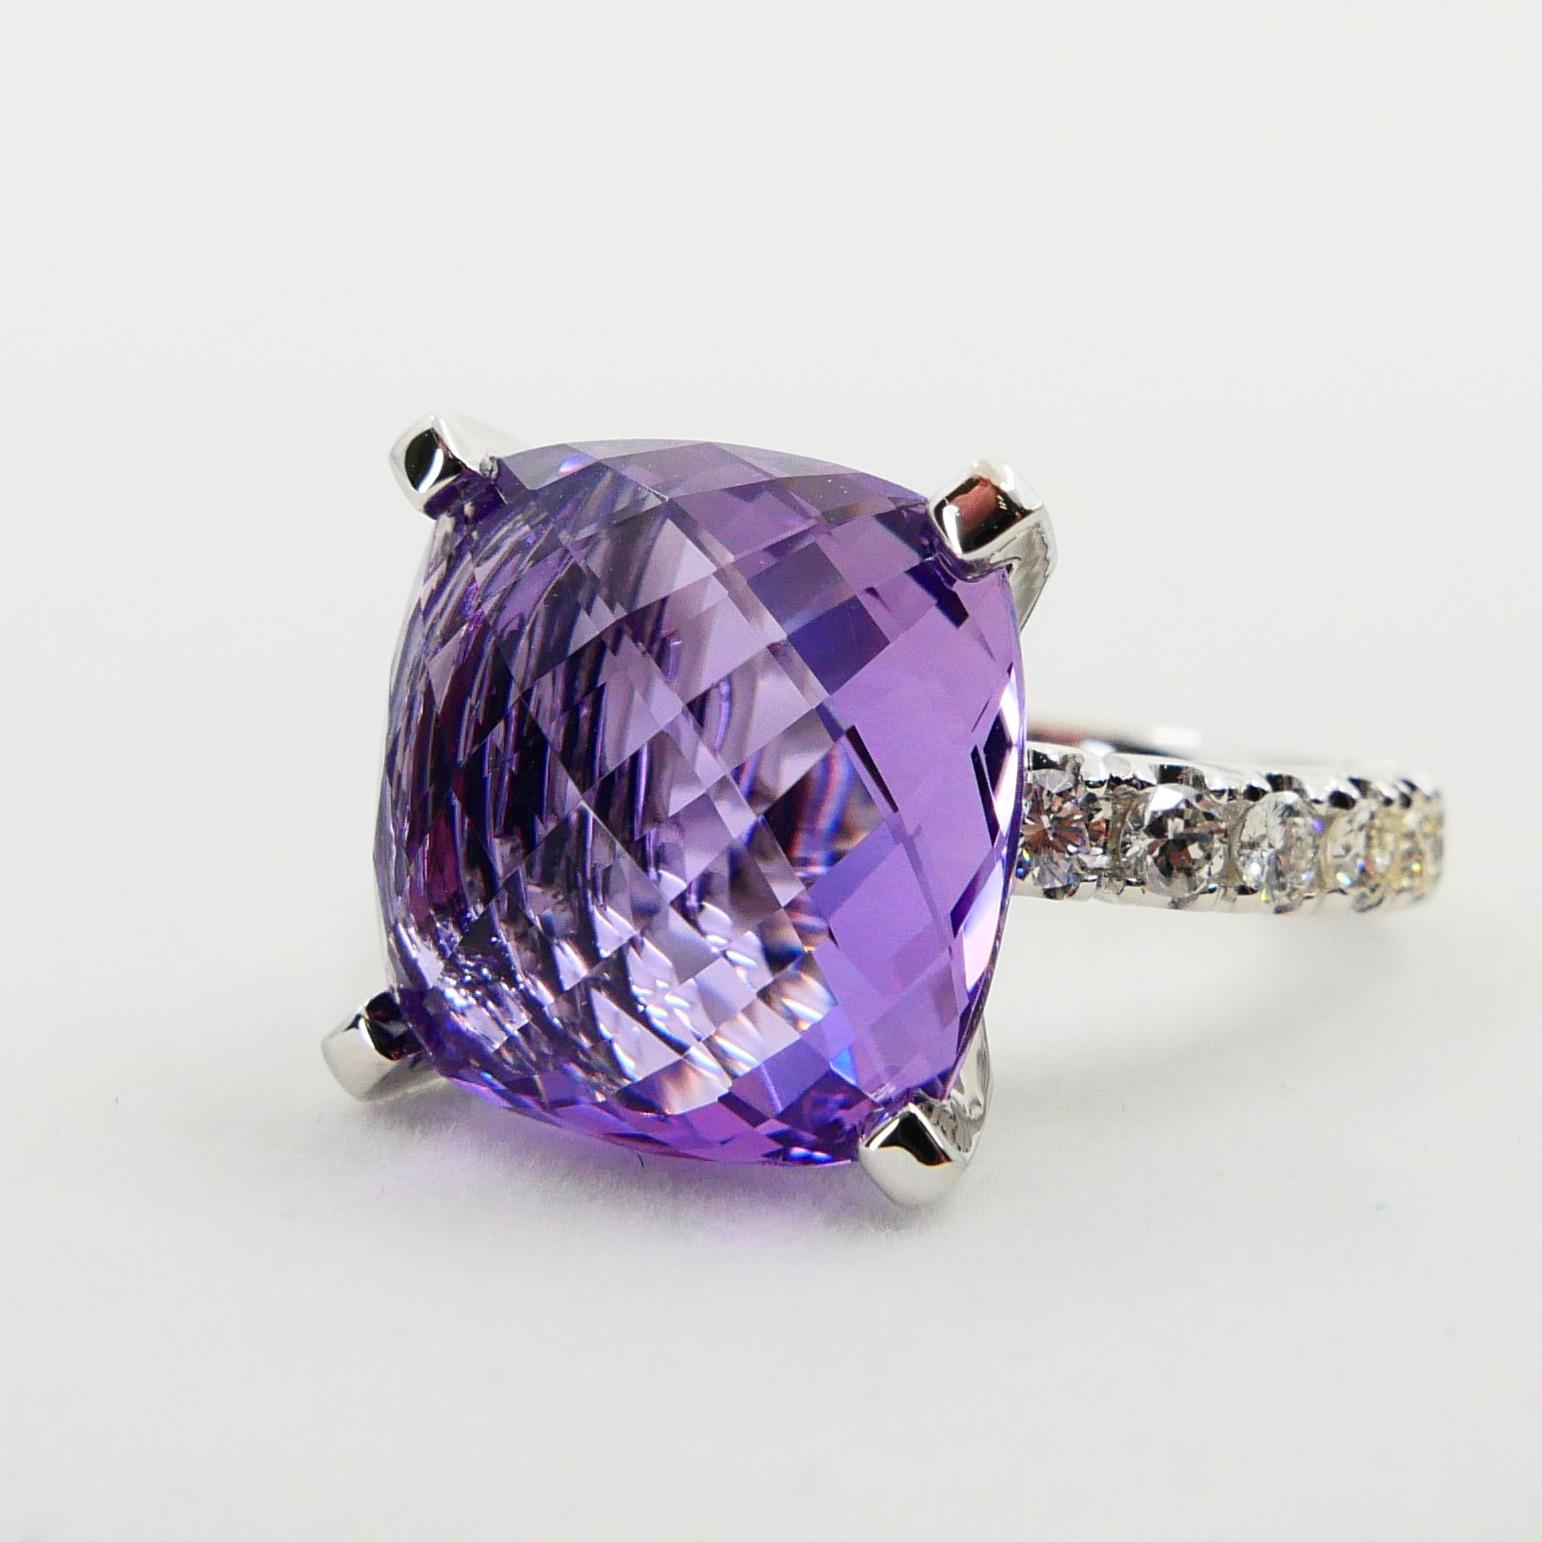 8.67 Carat Faceted Amethyst and Diamond Cocktail Ring, 18 Karat White Gold For Sale 10